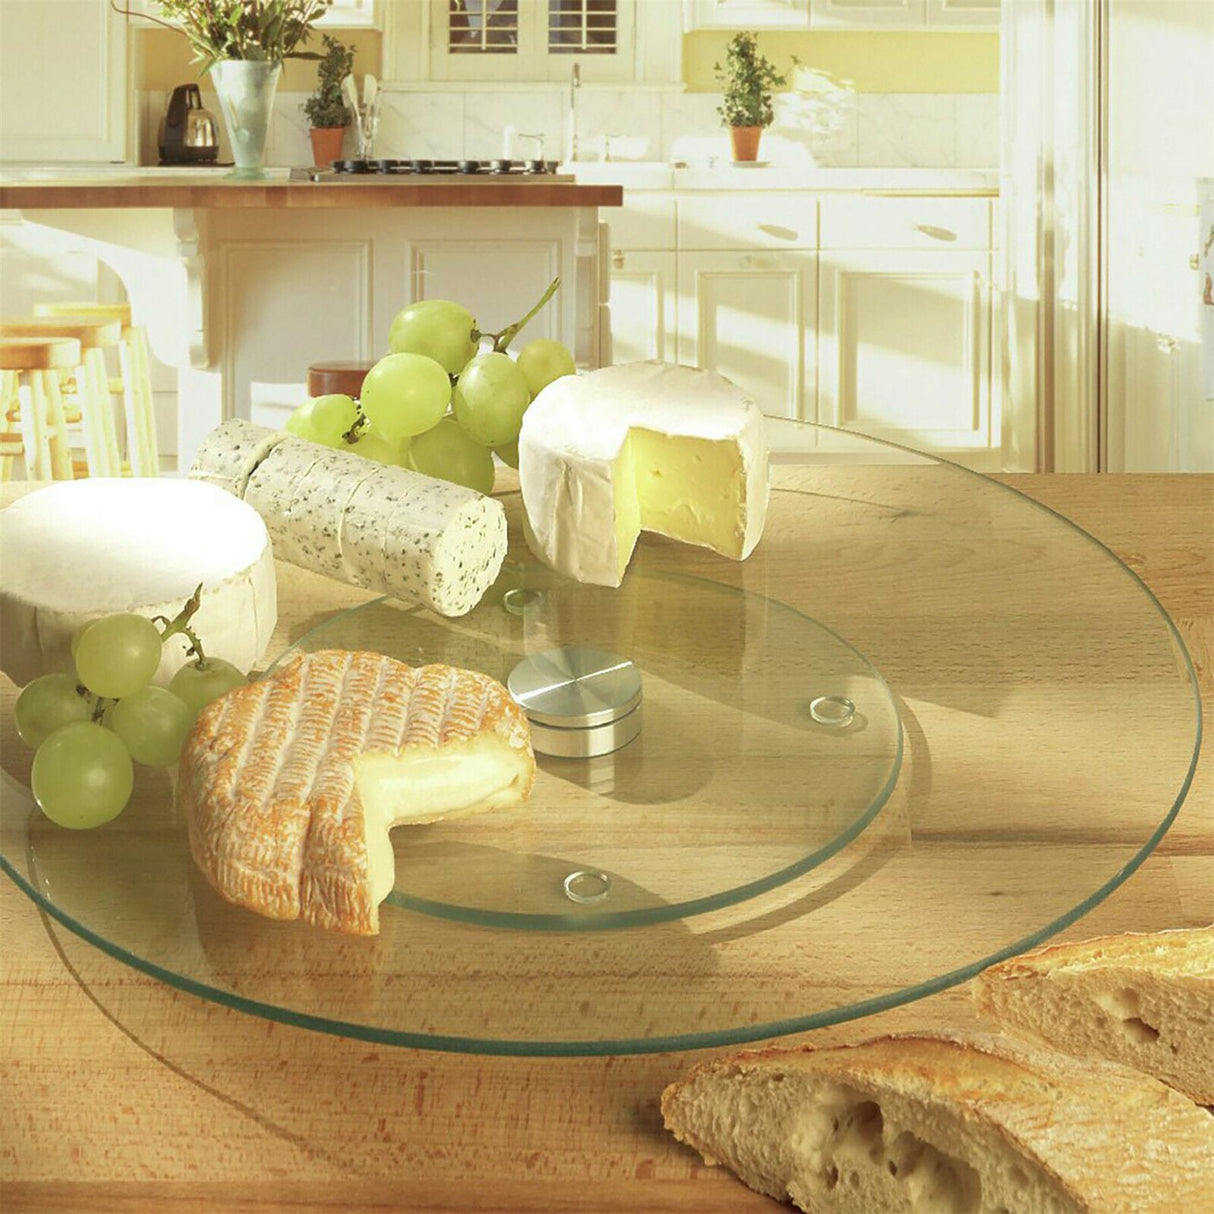 ROTATING SERVING PLATE by Geezy - UKBuyZone